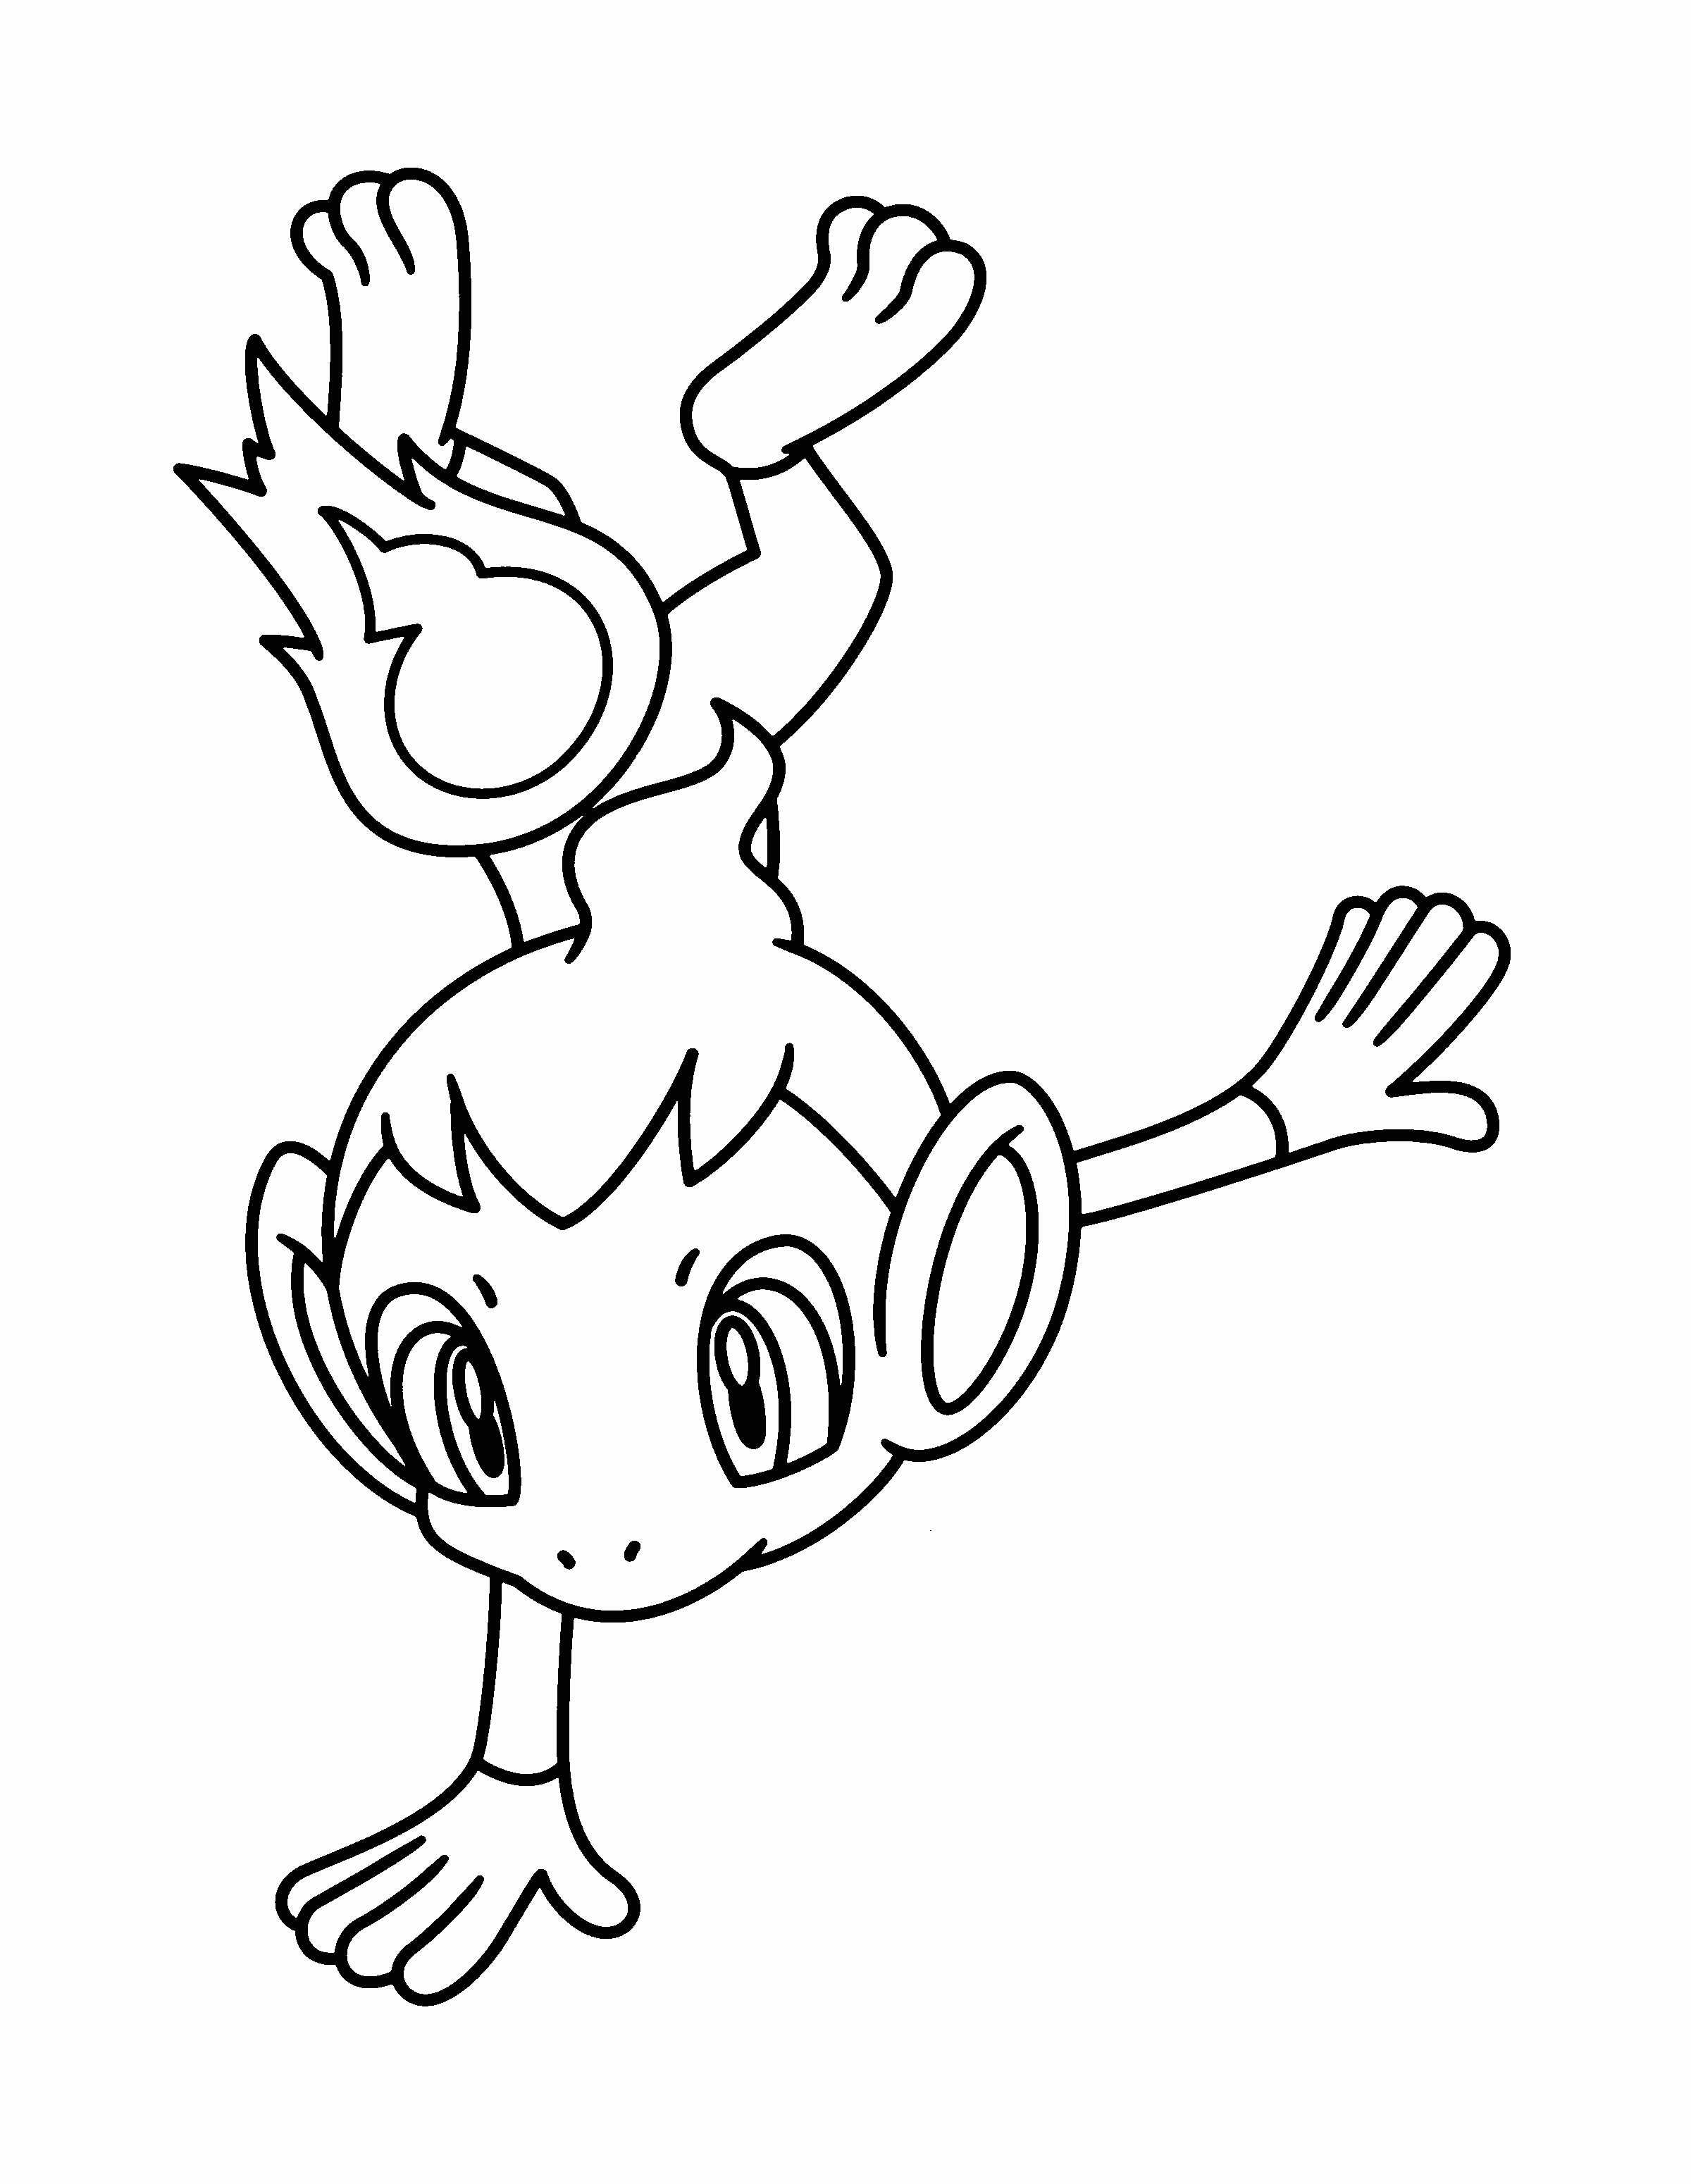 Pokemon Chimchar Coloring Pages – Coloring Pics